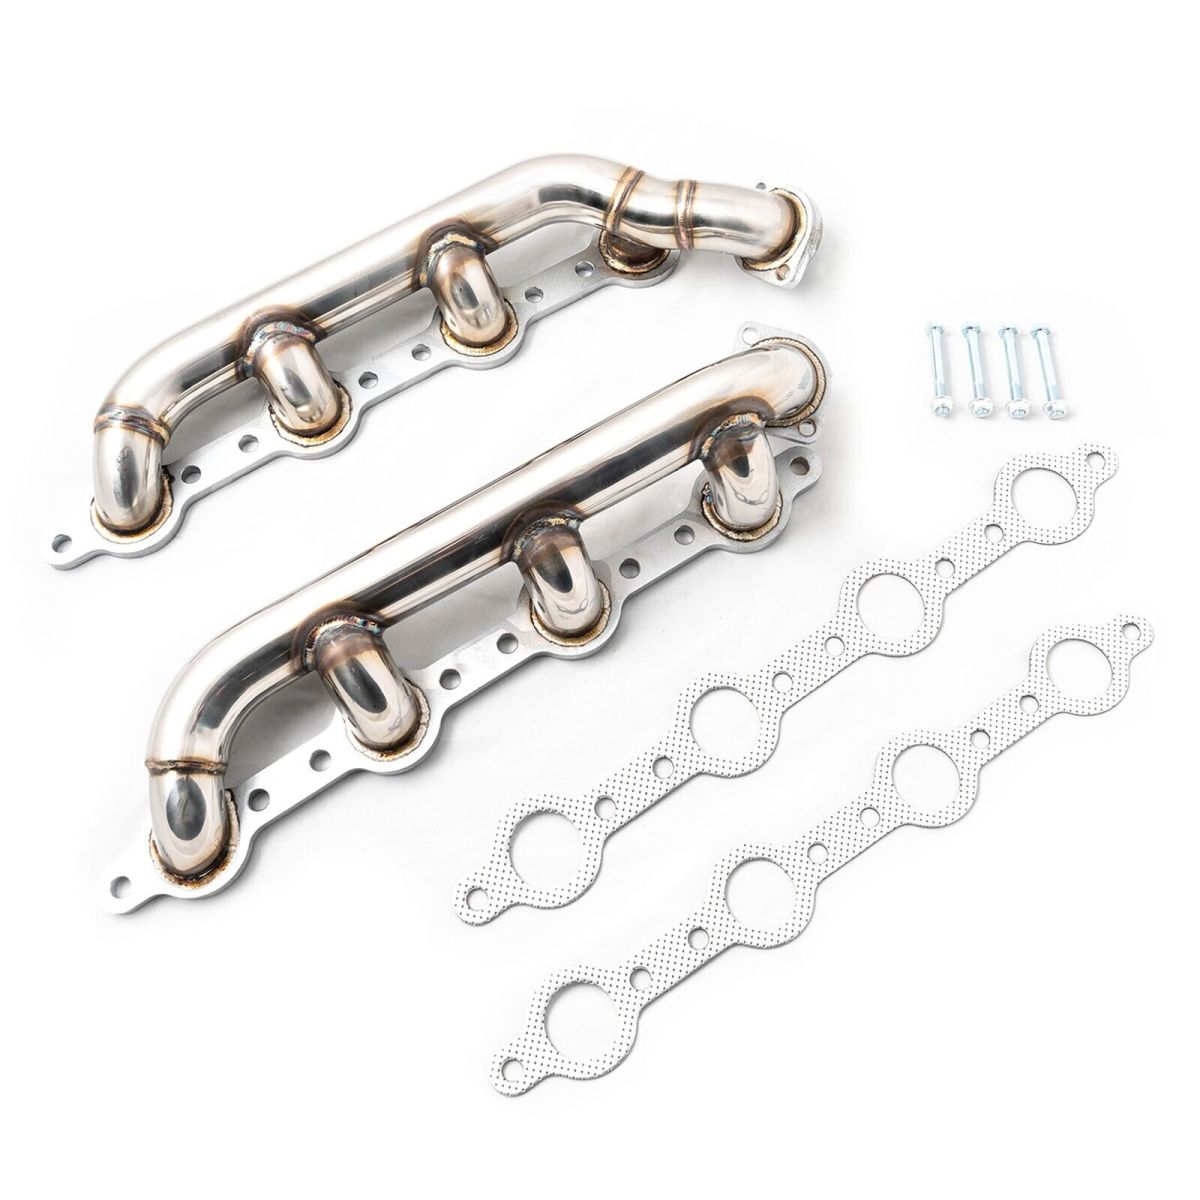 Rudy's Performance Parts - Rudy's Stainless Steel Exhaust Manifolds For 1999.5-2003 Ford 7.3L Powerstroke